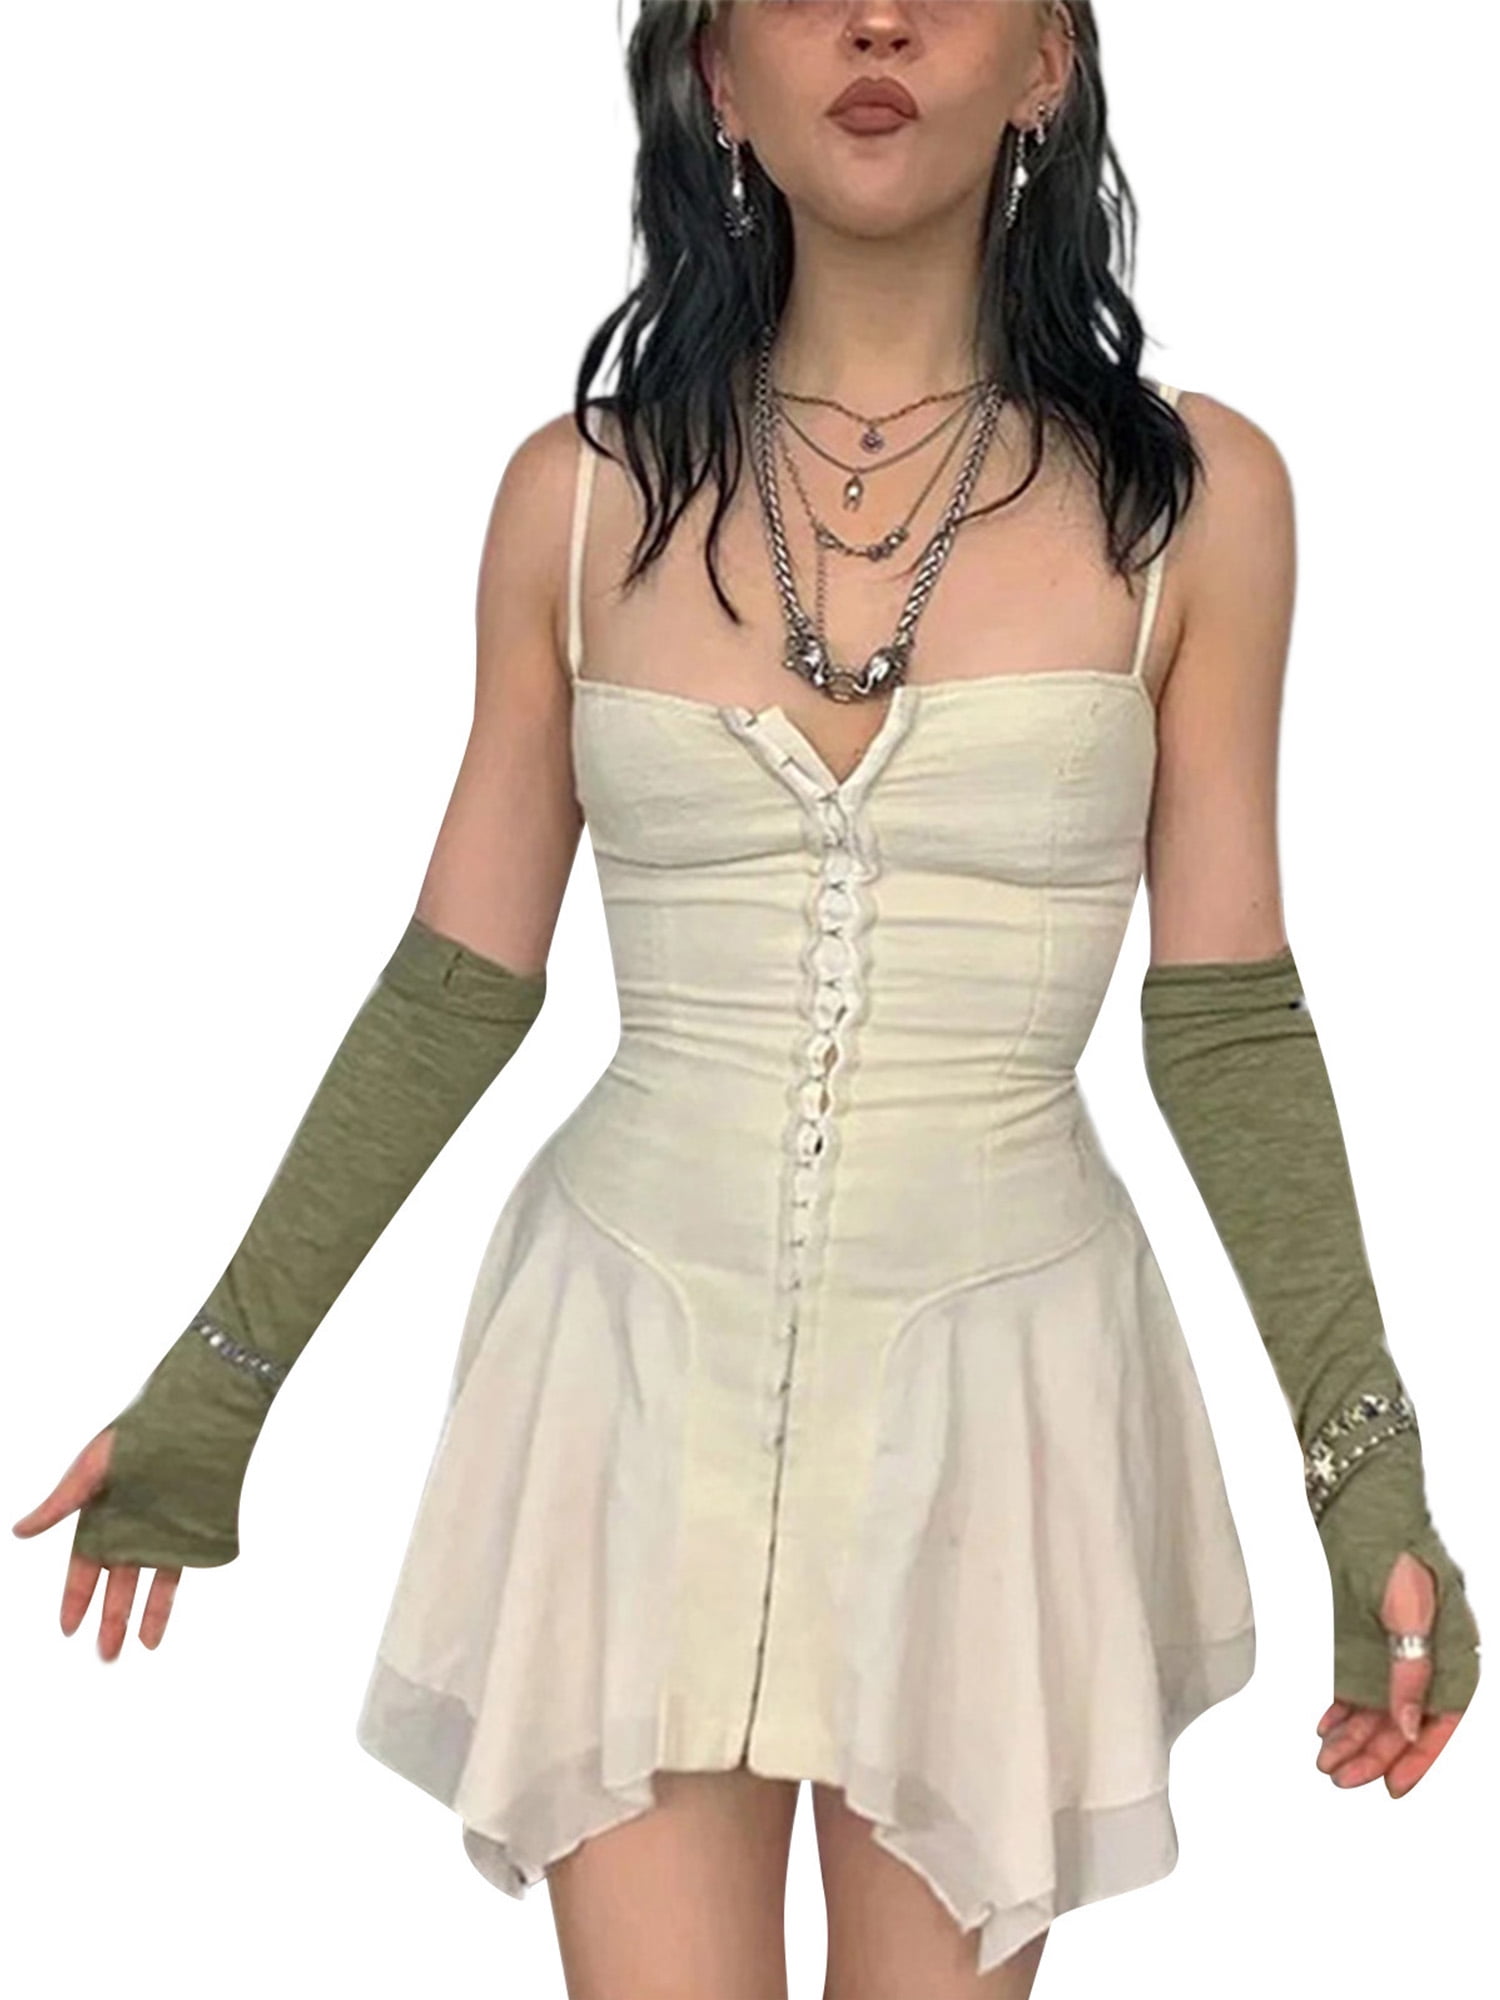 V Neck Empire Waist Cami Adult Women's Costume With Gathering Fancy Dress 